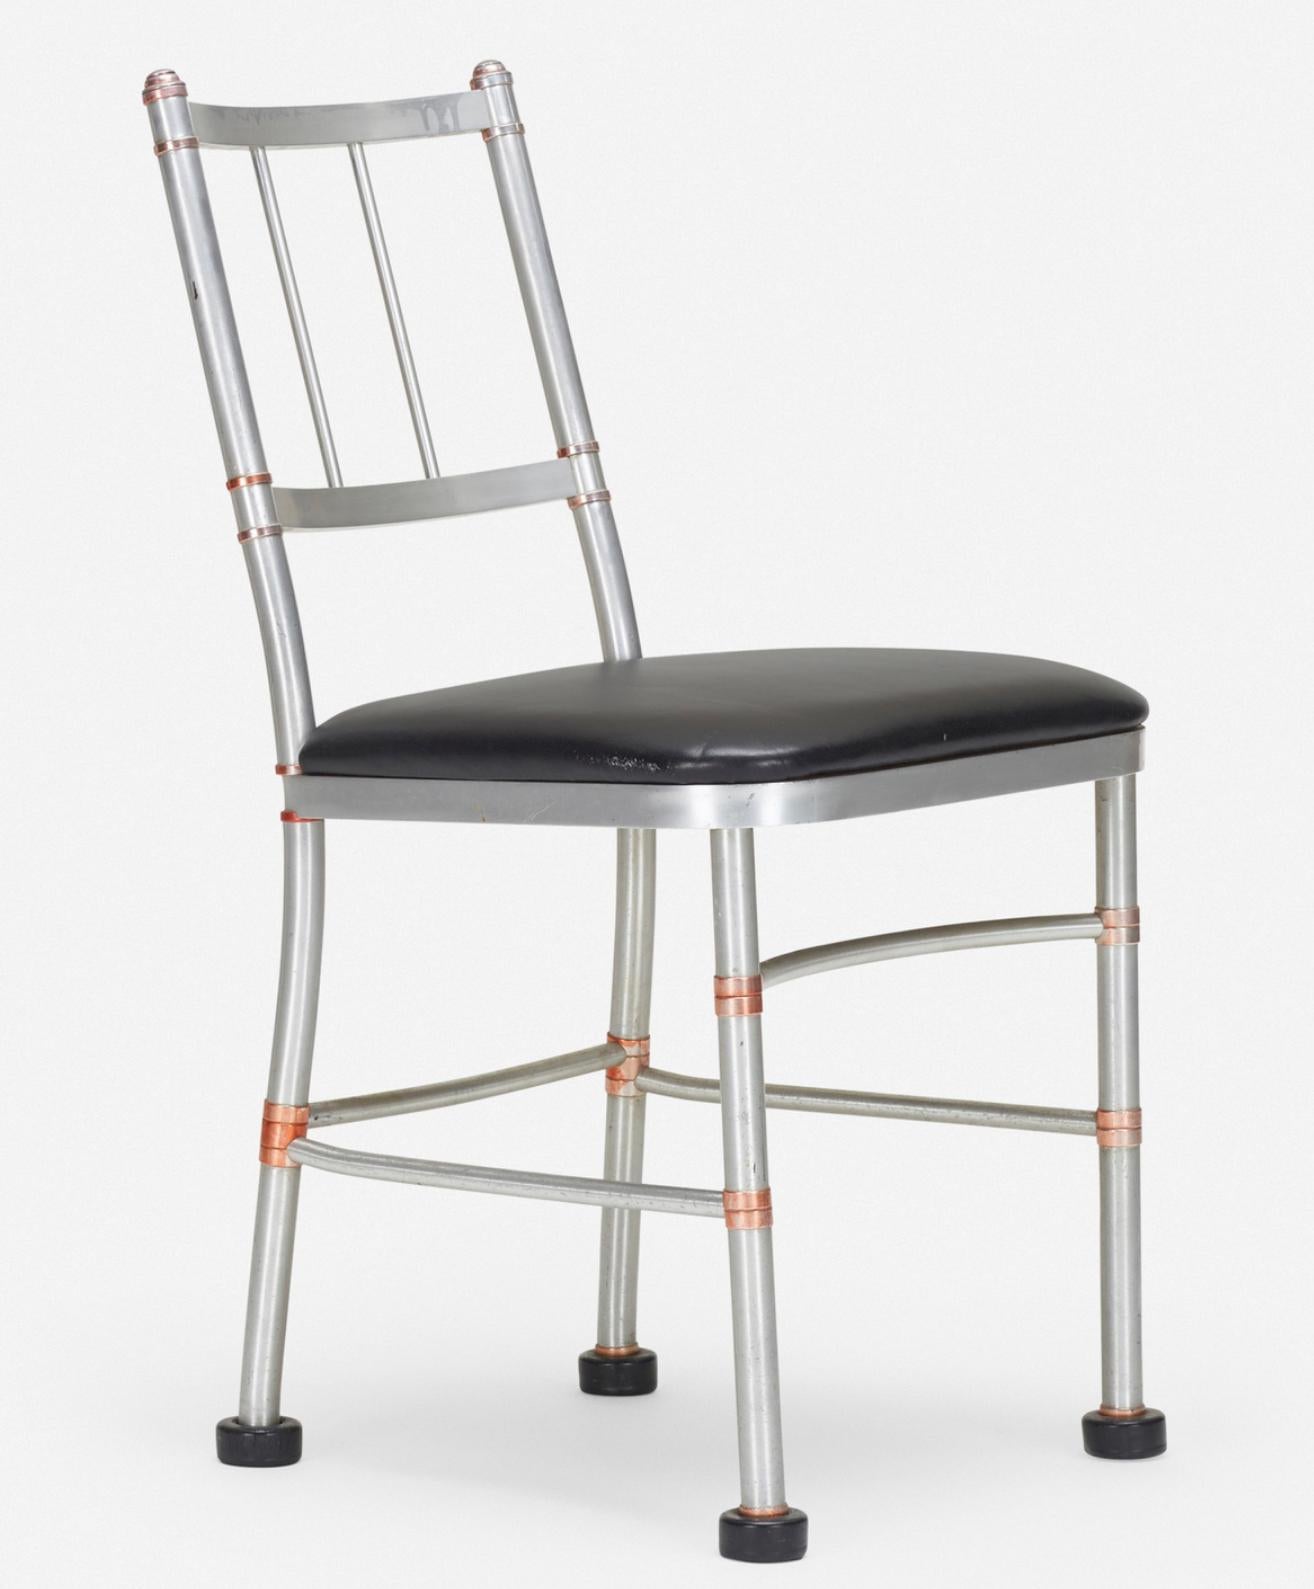 Warren McArthur Streamline Modern Aluminum Chair, Art Deco, 1930s, USA In Good Condition For Sale In Brooklyn, NY